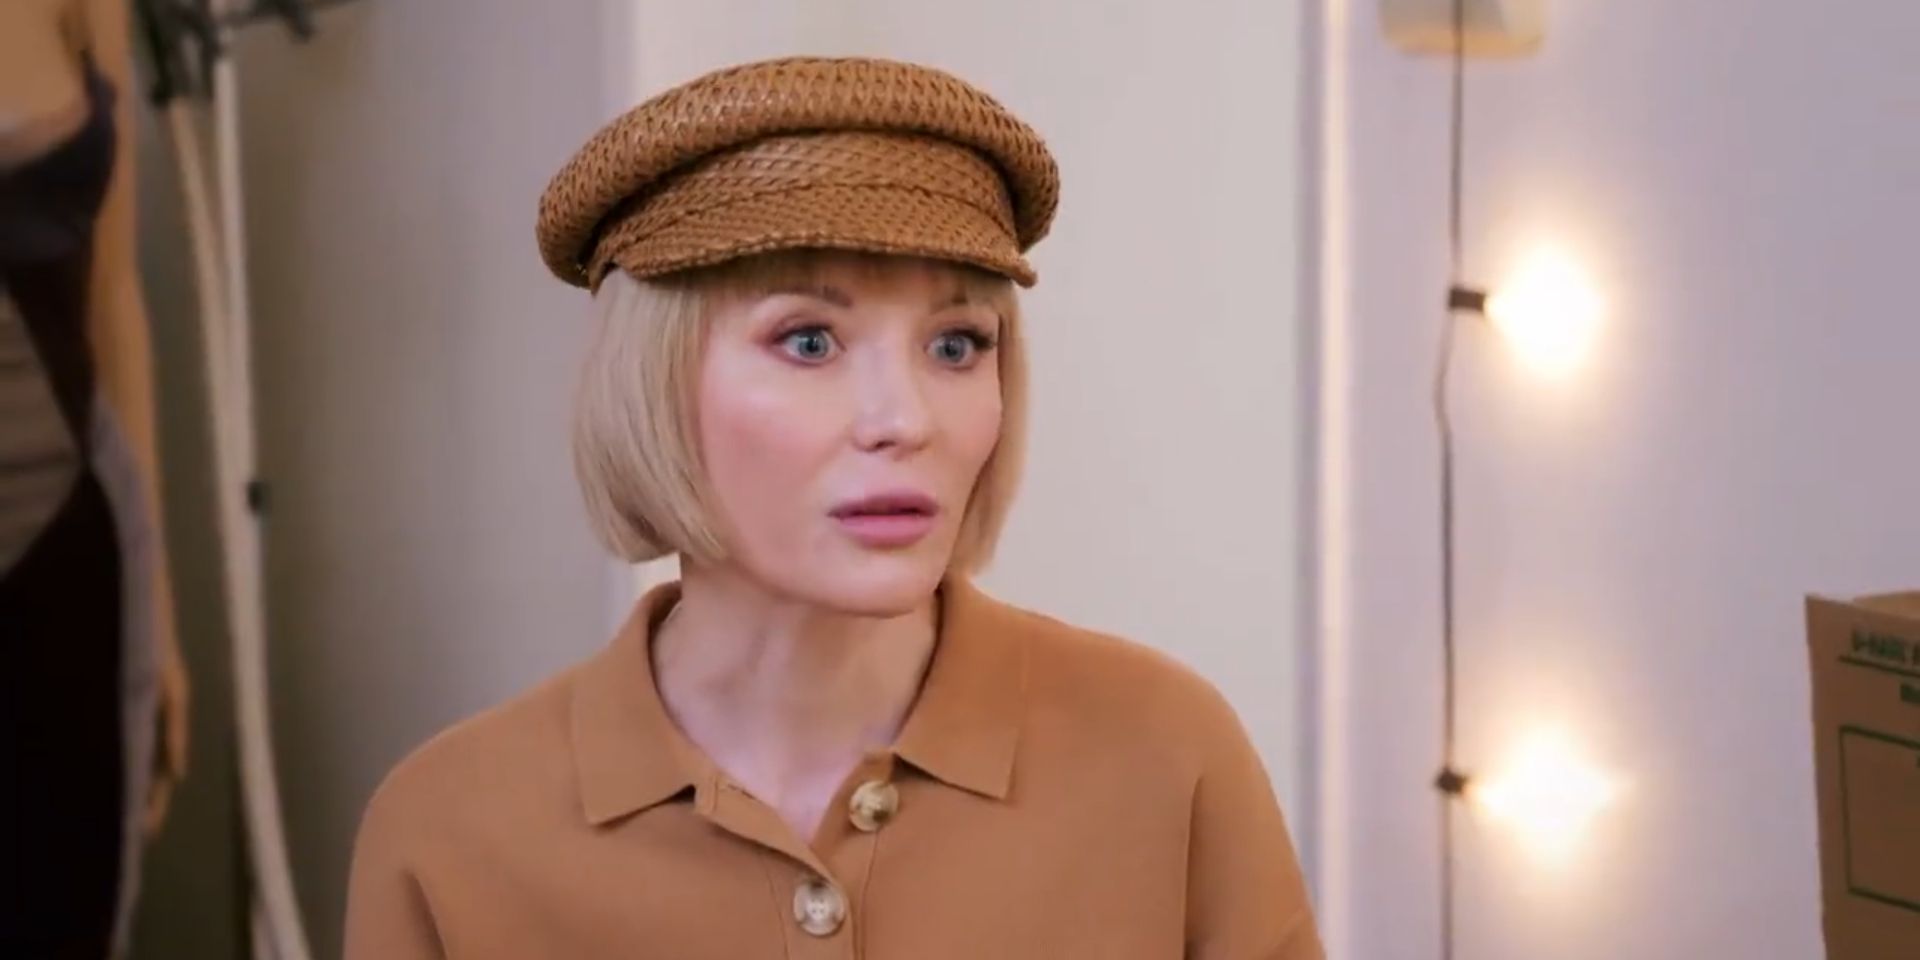 90 Day Fiancé's Nicole Sherbiny wearing a brown hat looking shocked